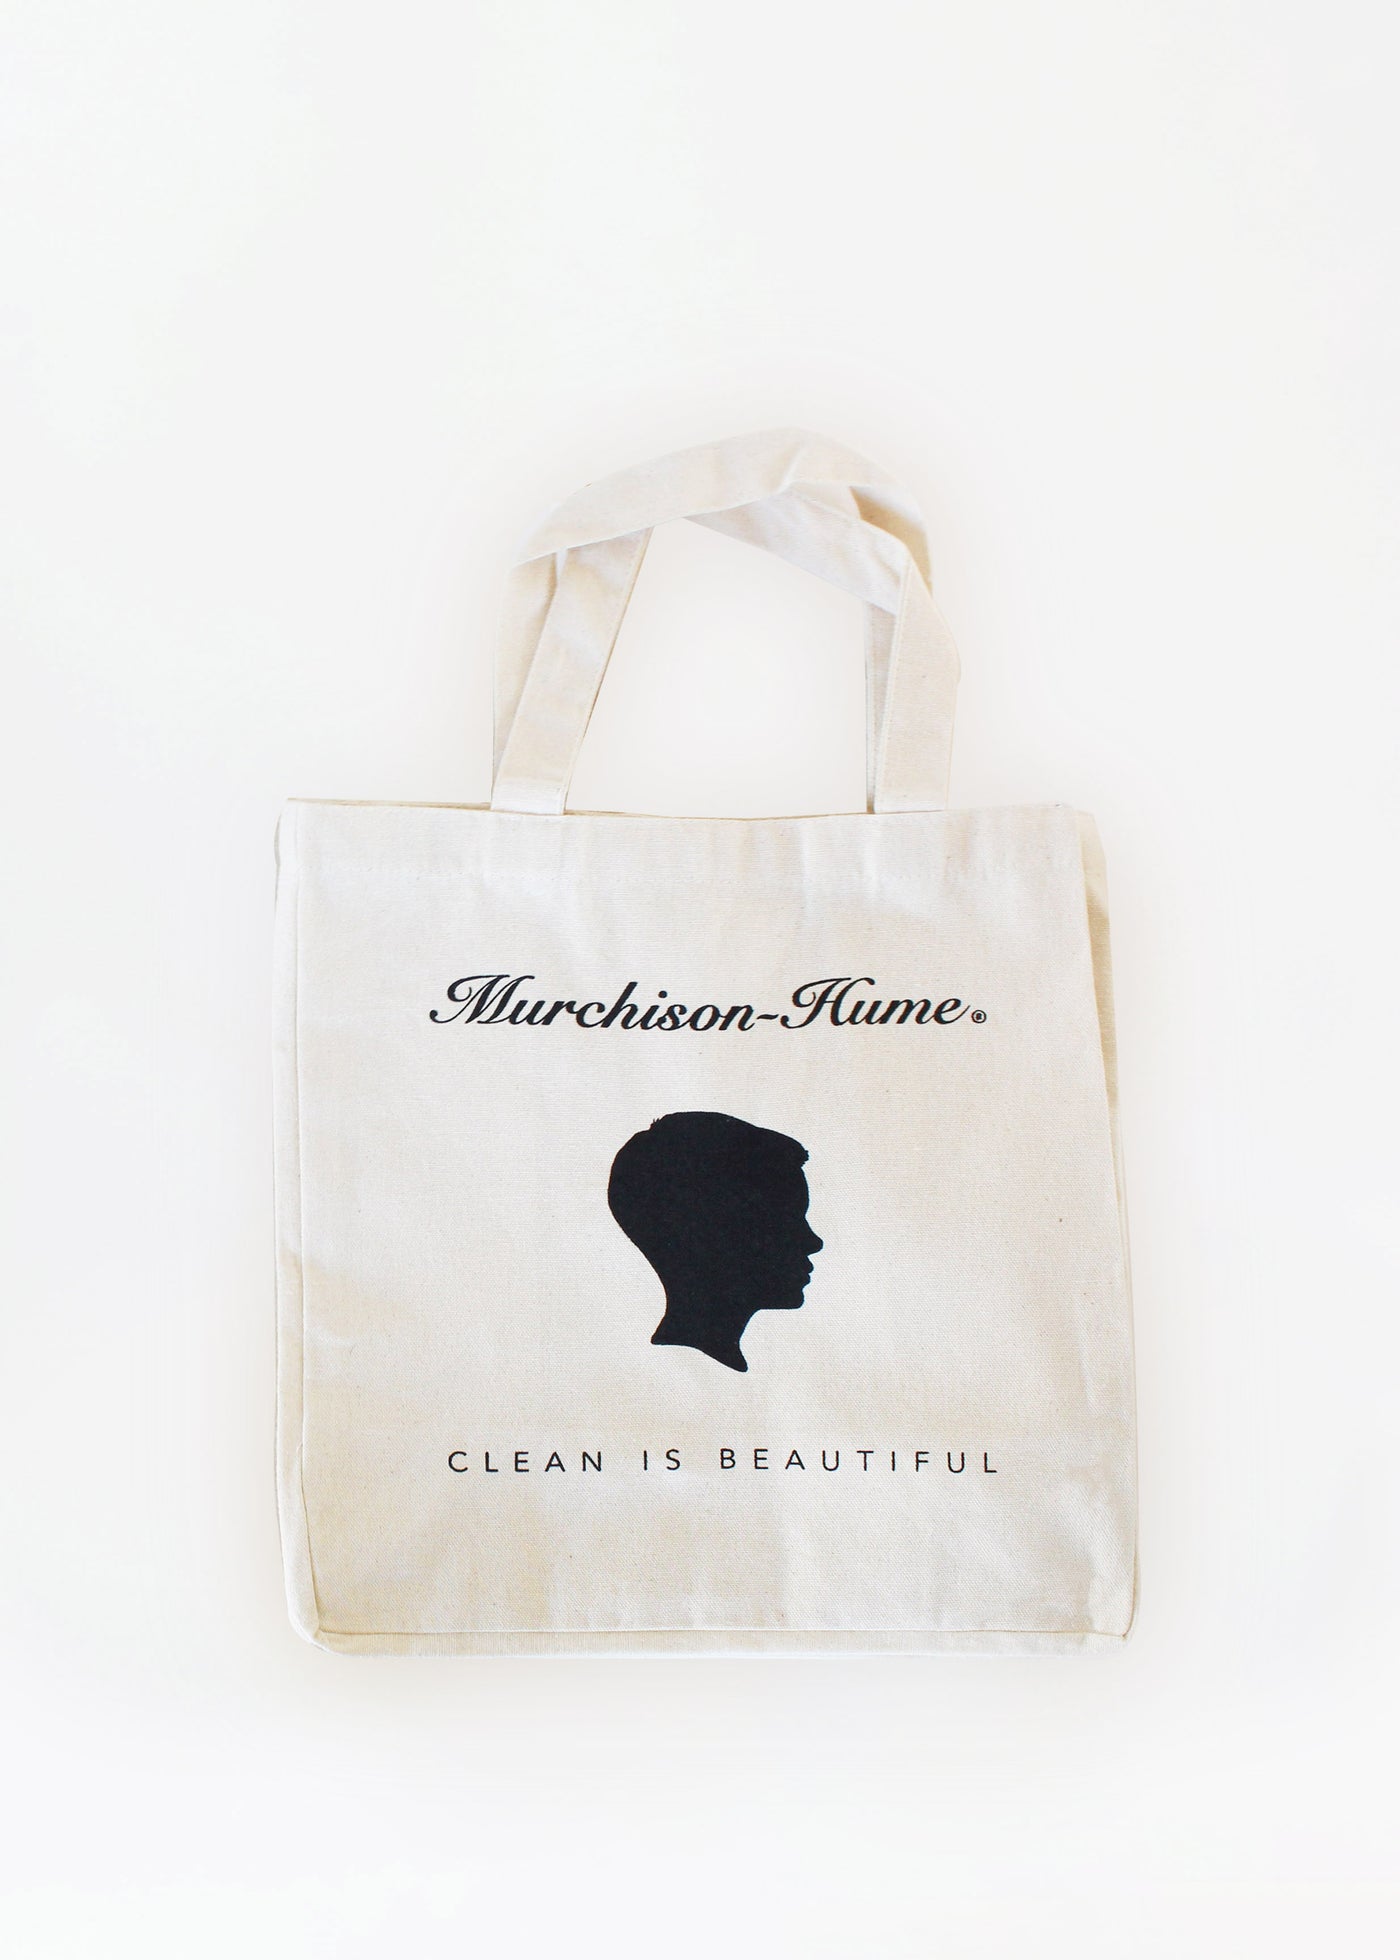 Murchison Hume Canvas Tote Bag